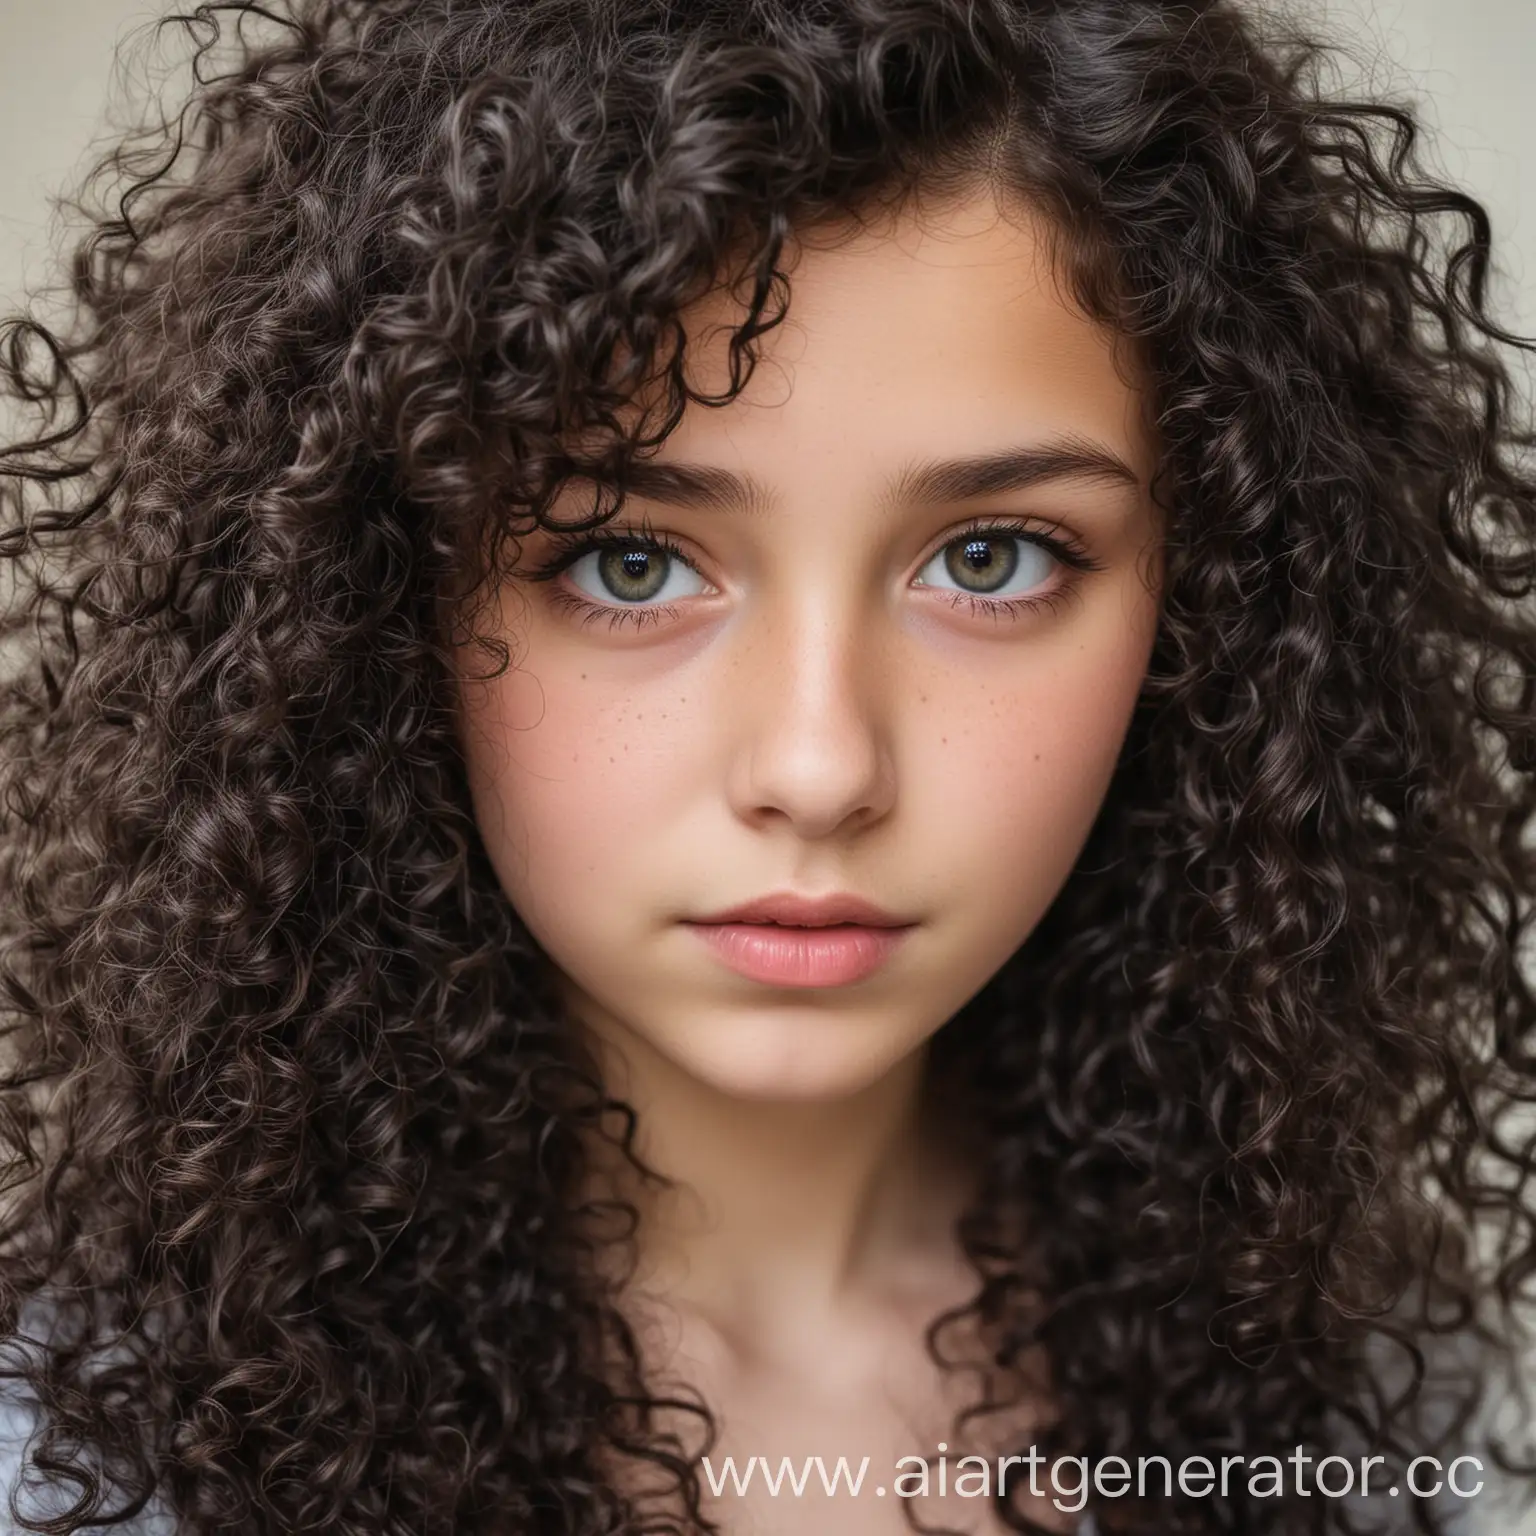 CurlyEyed-Girl-with-Dark-Hair-18-Years-Old